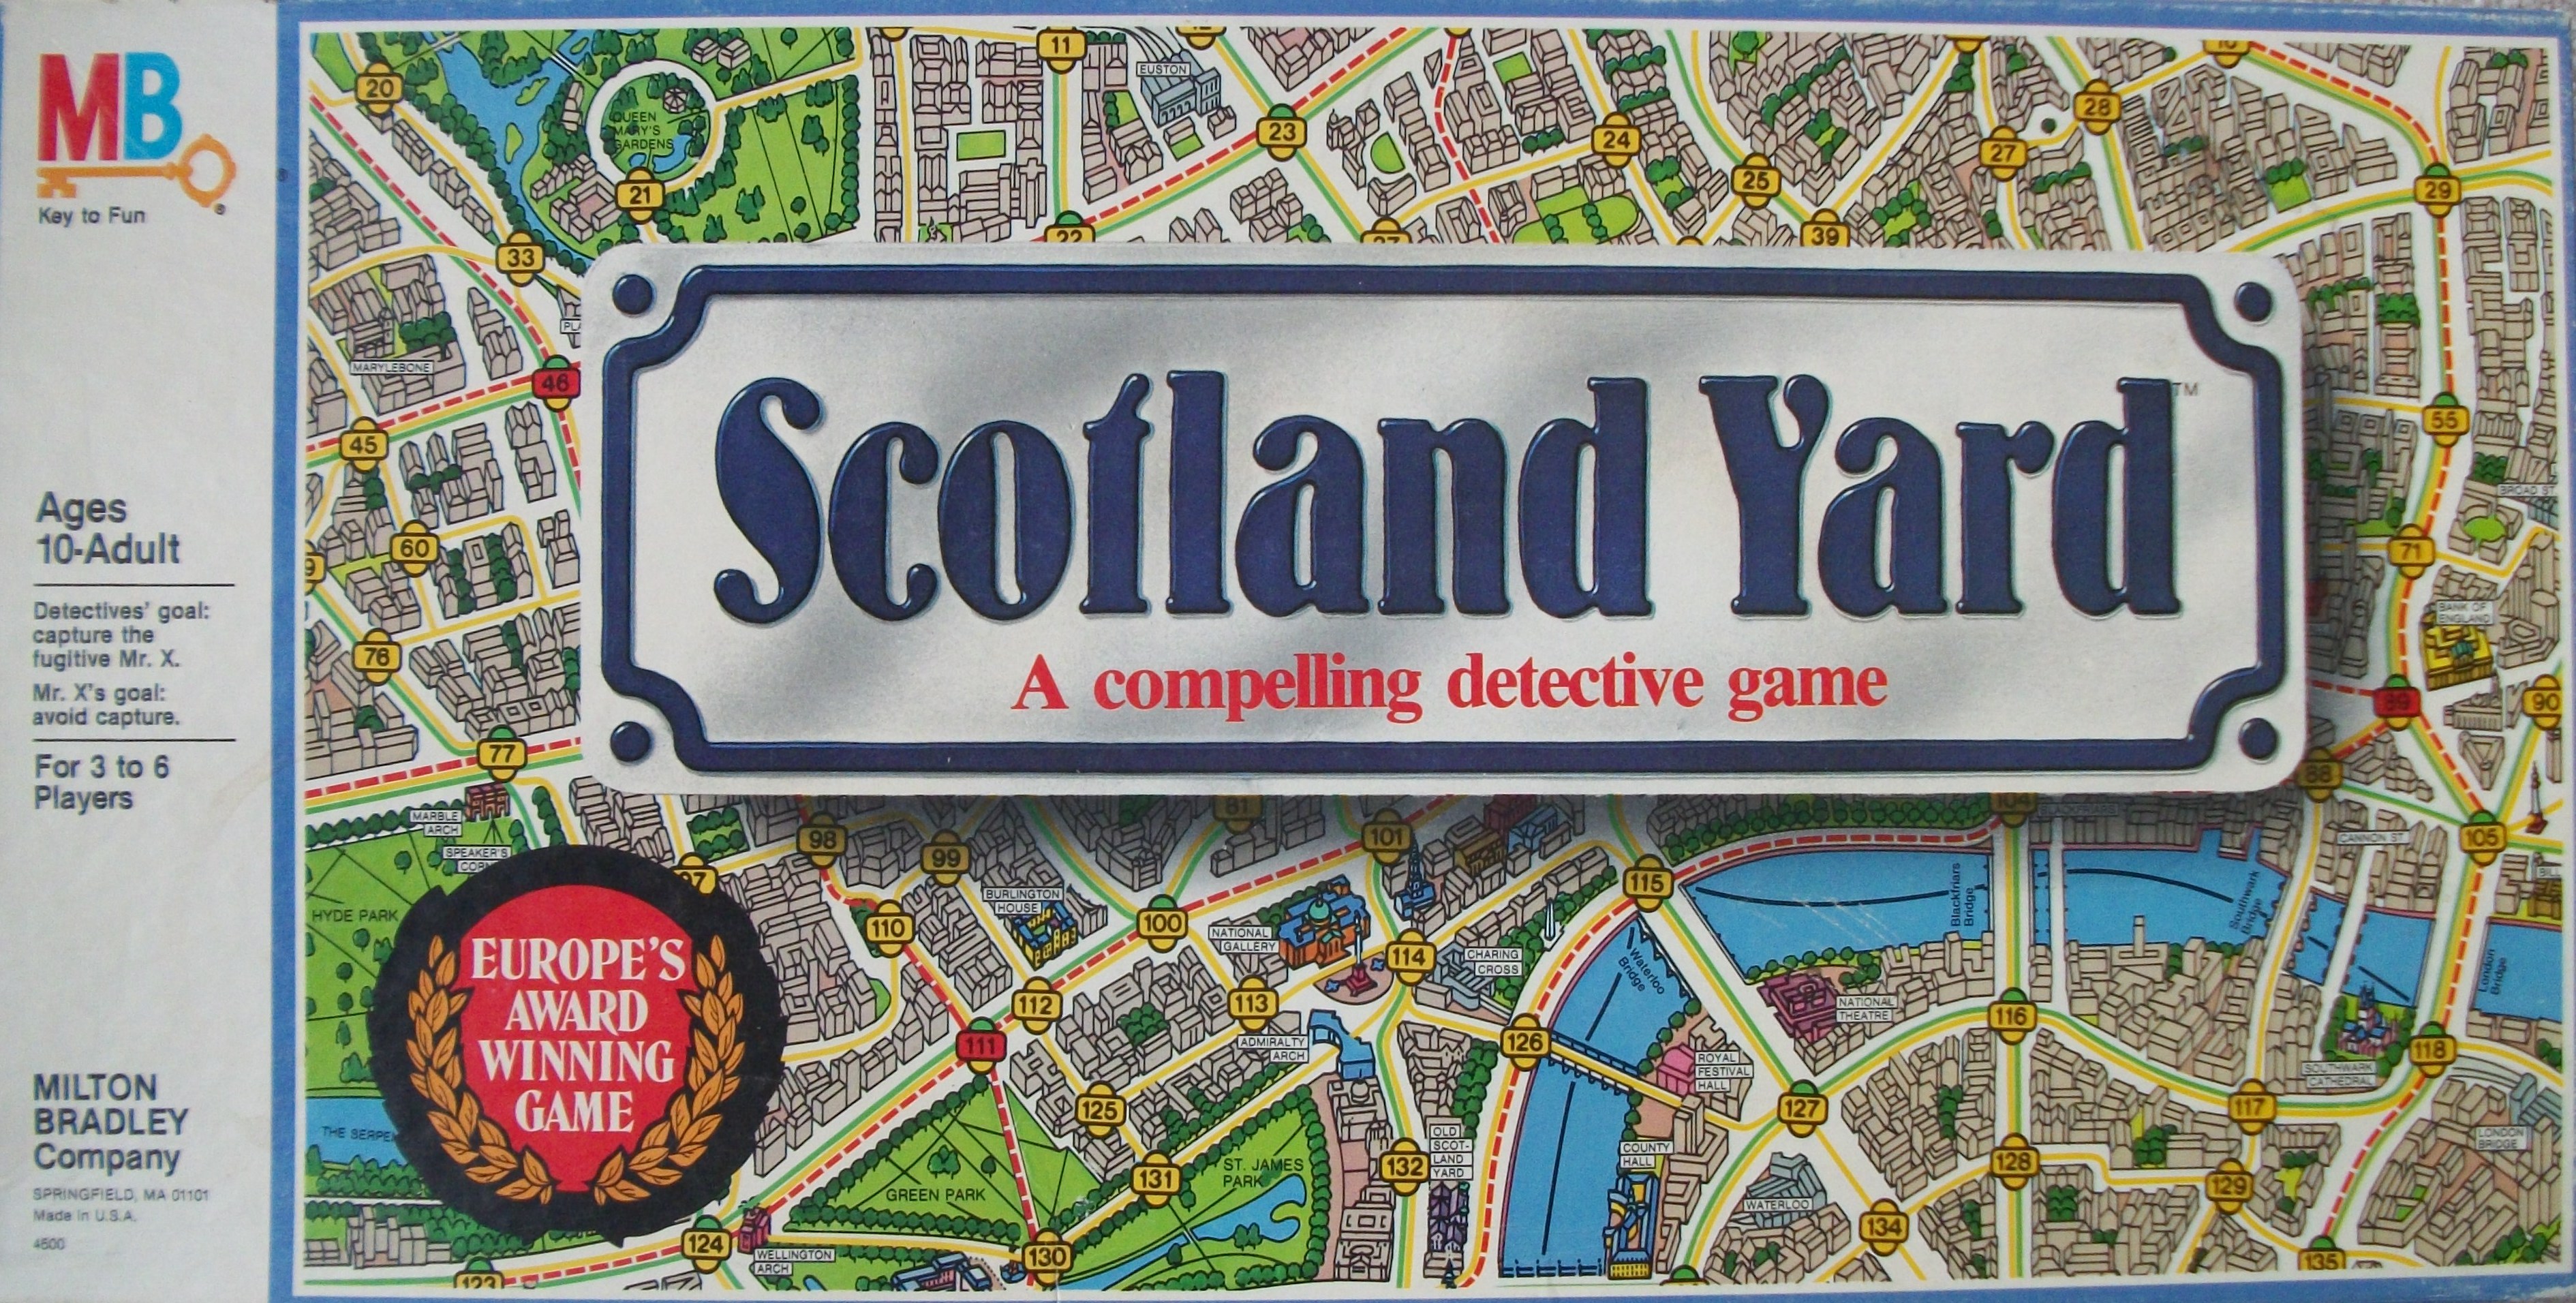 Play the Scotland Yard Board Game on Family Game Night